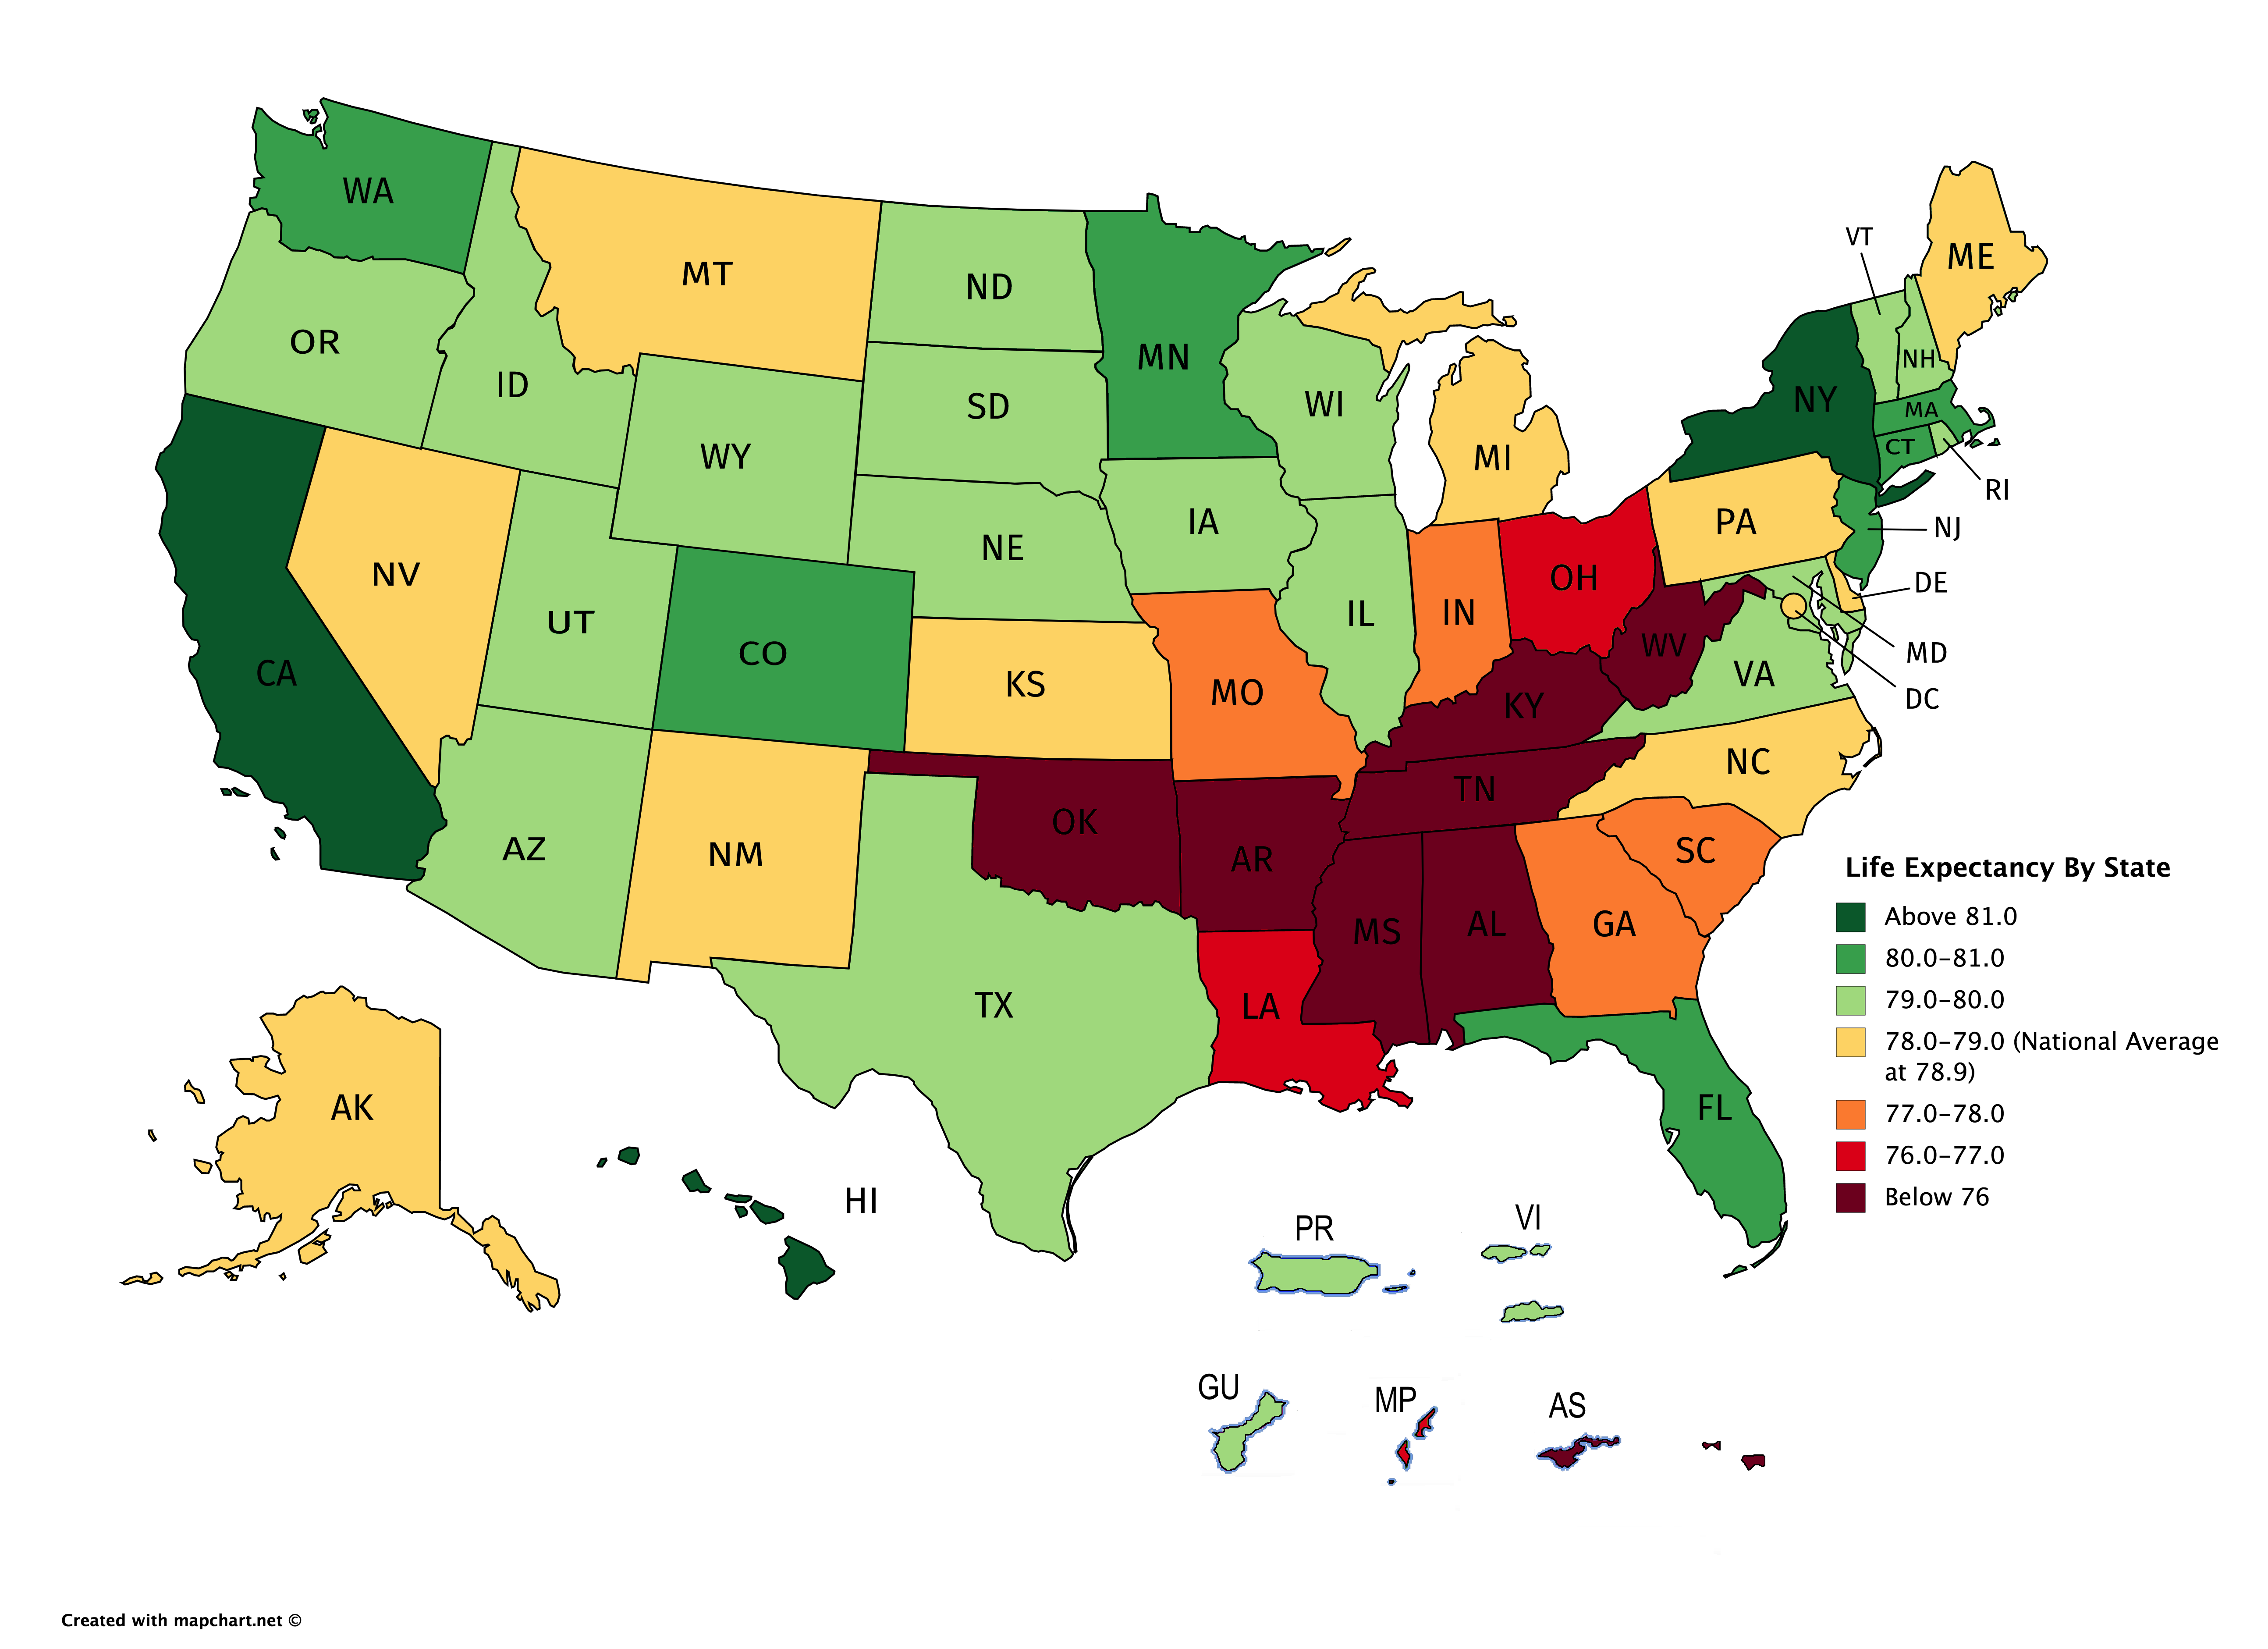 Life_Expectancy_By_State_territory_2.png